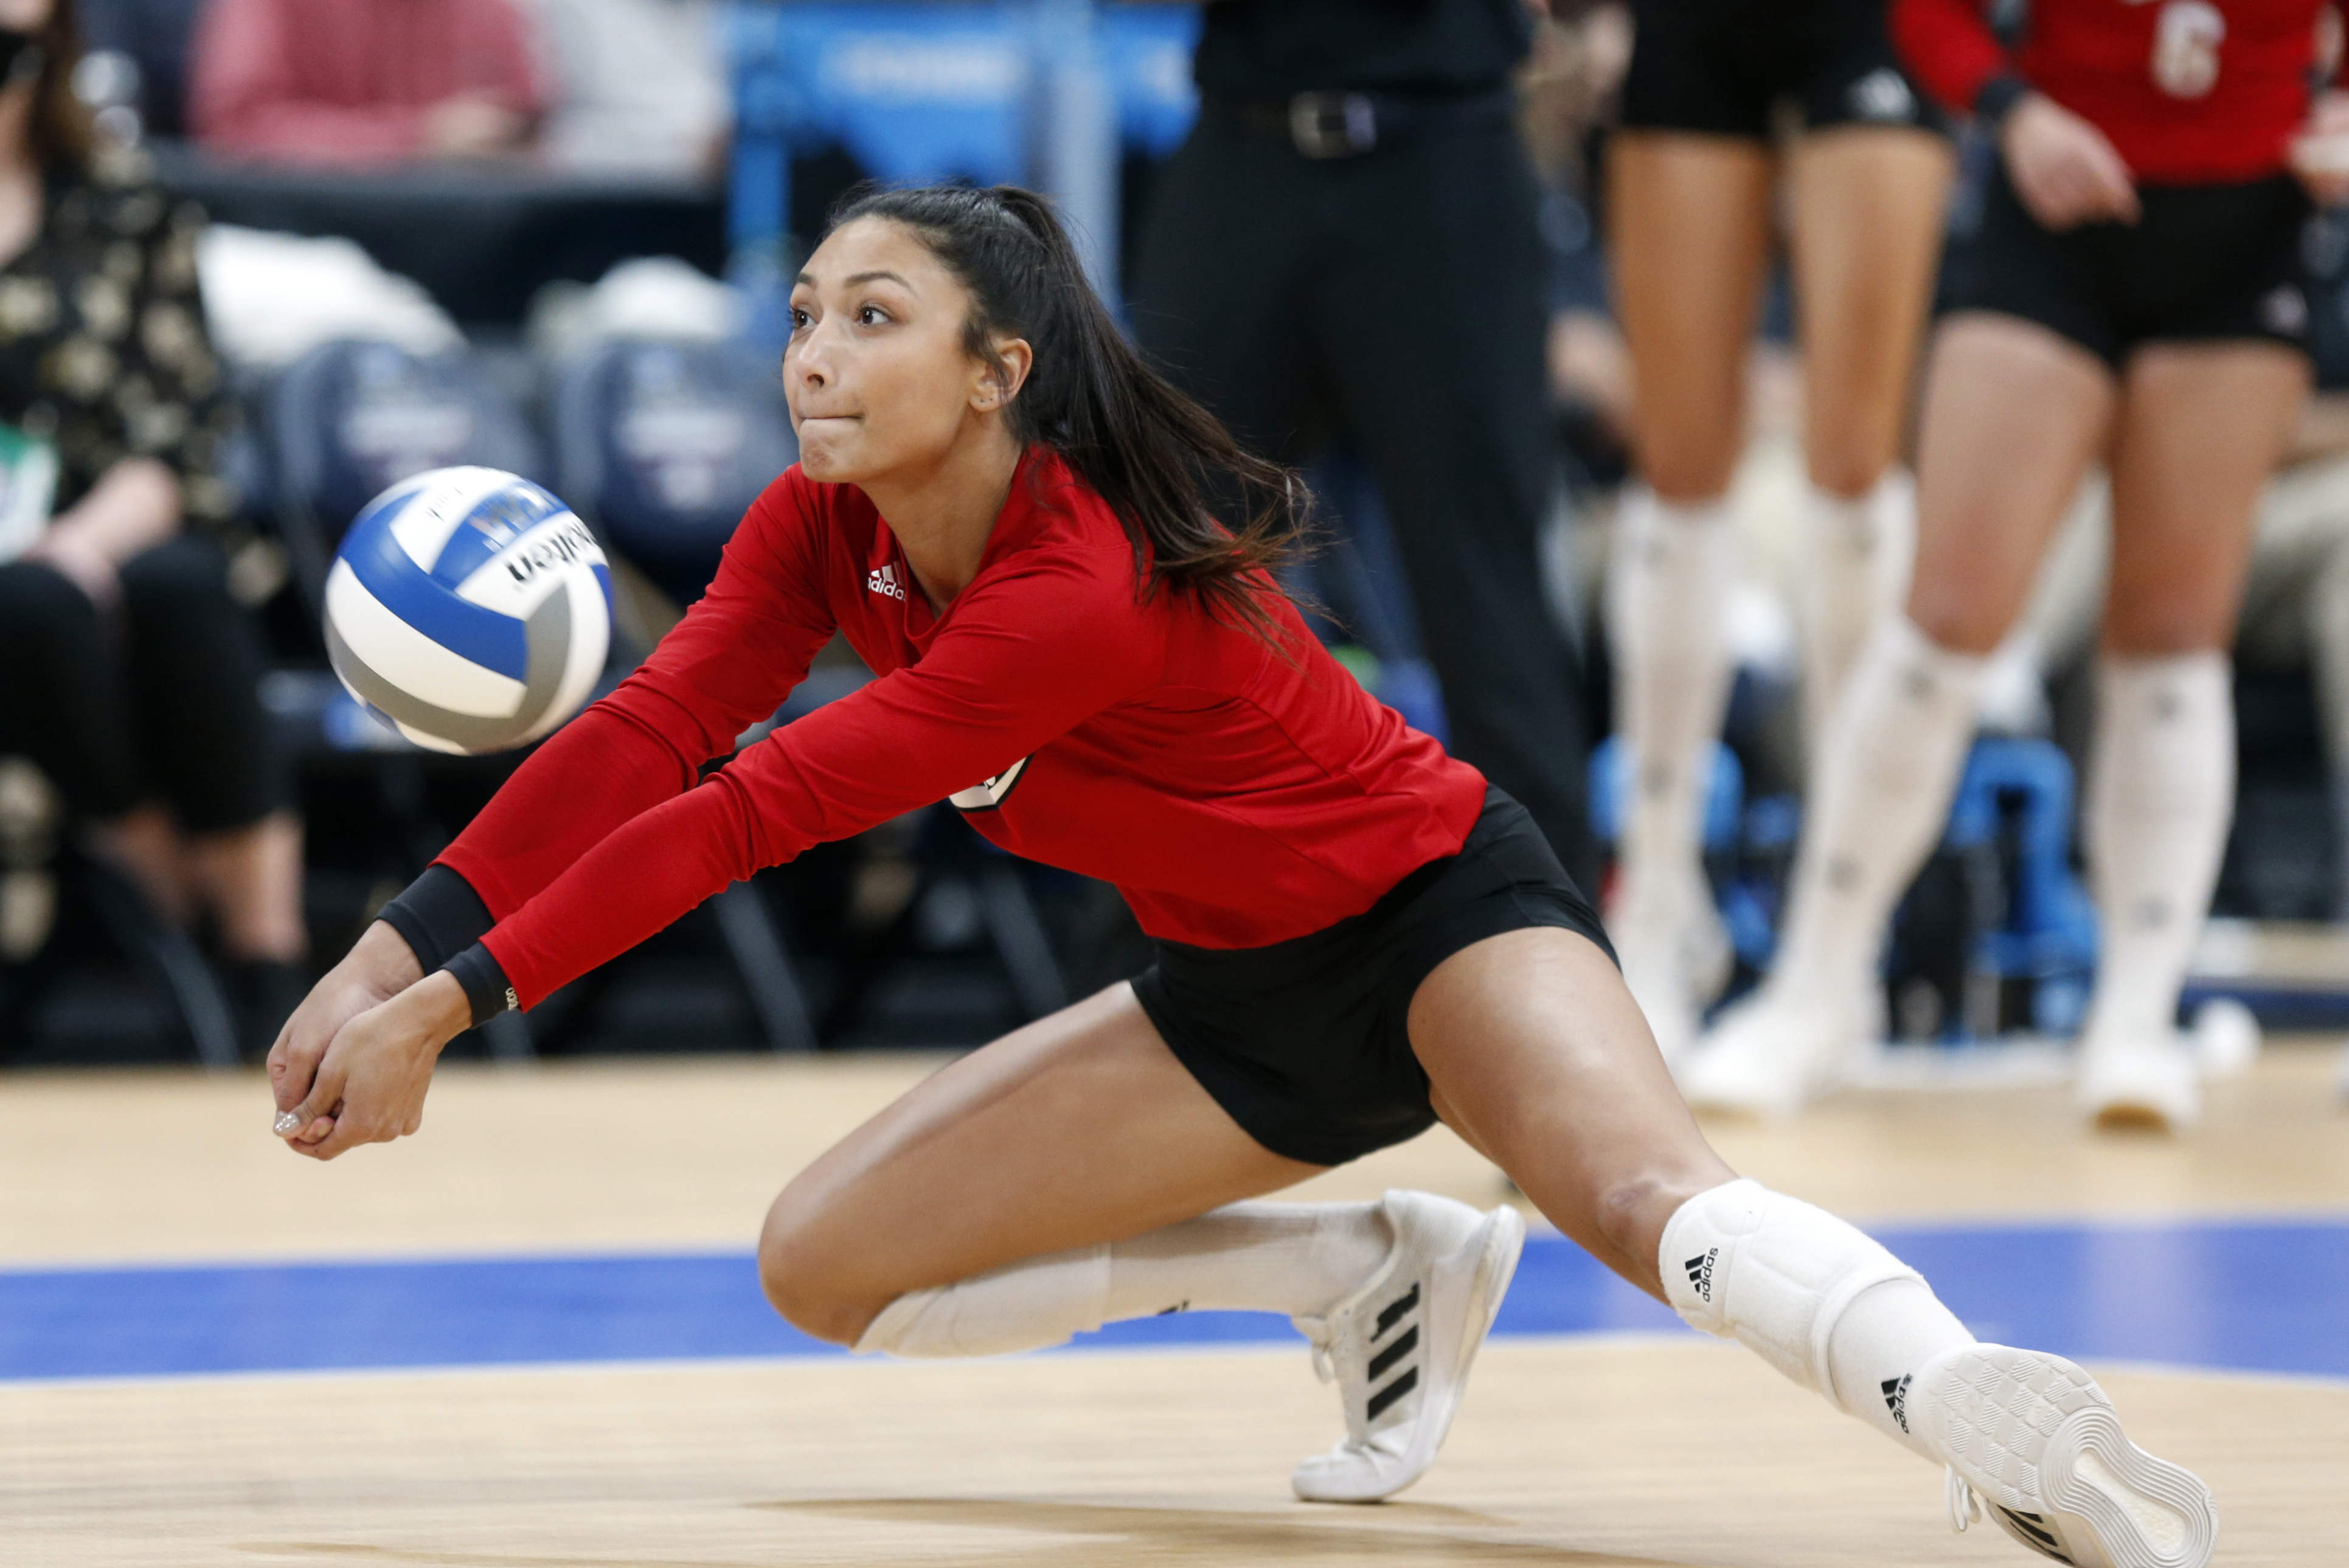 NCAA womens volleyball semi finals schedule 2022 Time, TV channel, live stream, how to watch